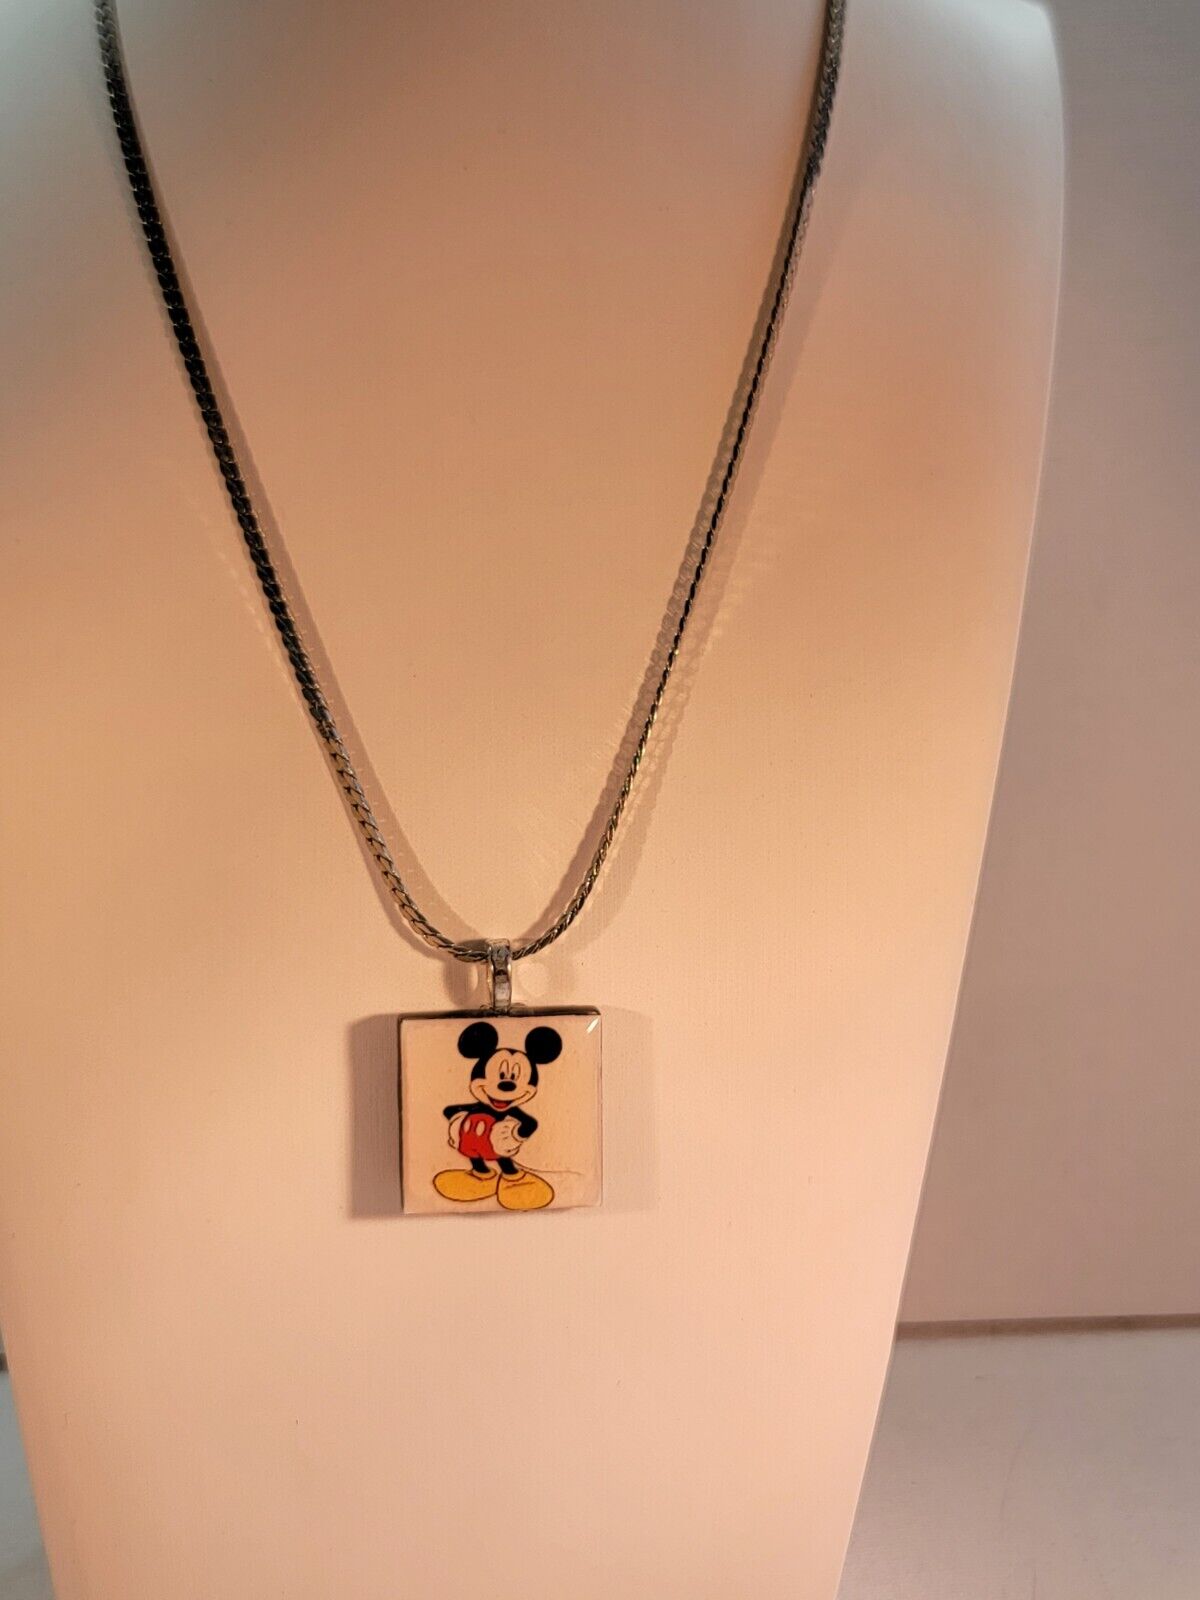 Vintage Mickey Mouse Necklace Pendant & Silver Tone Chain